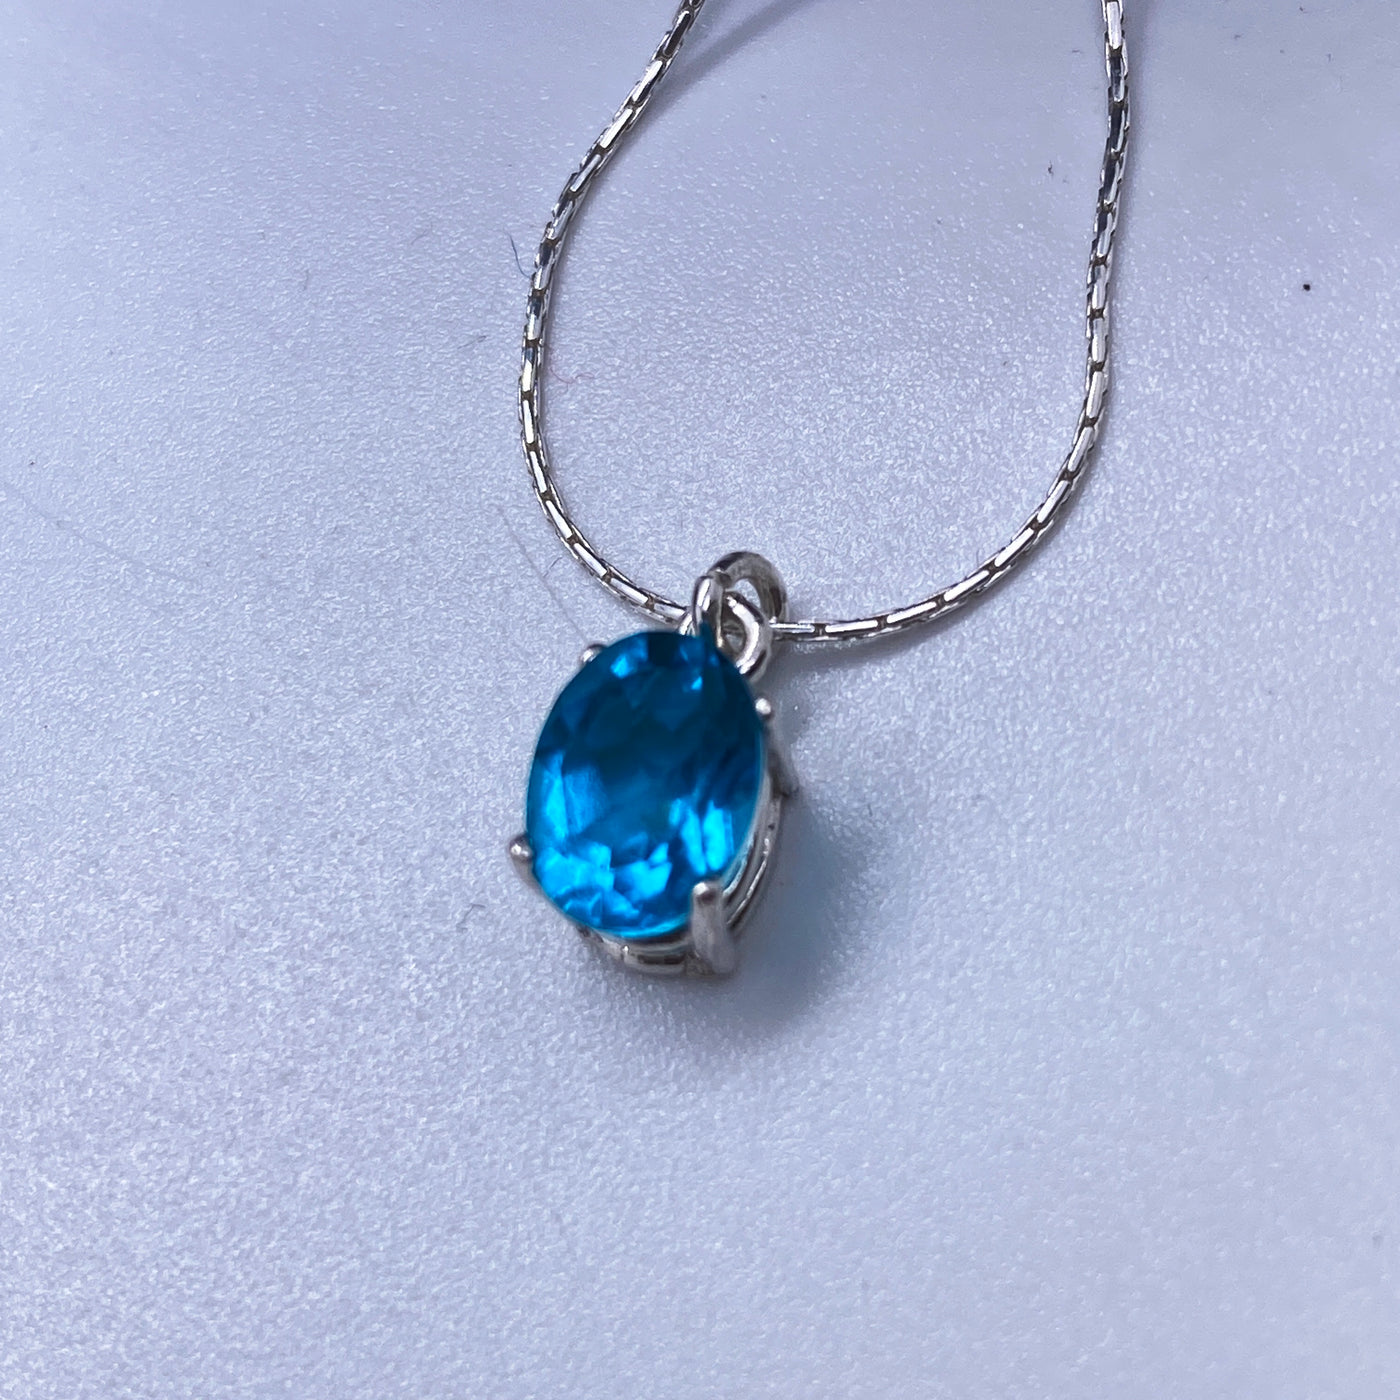 Paraiba oval 8X6 mm on sterling silver pendant